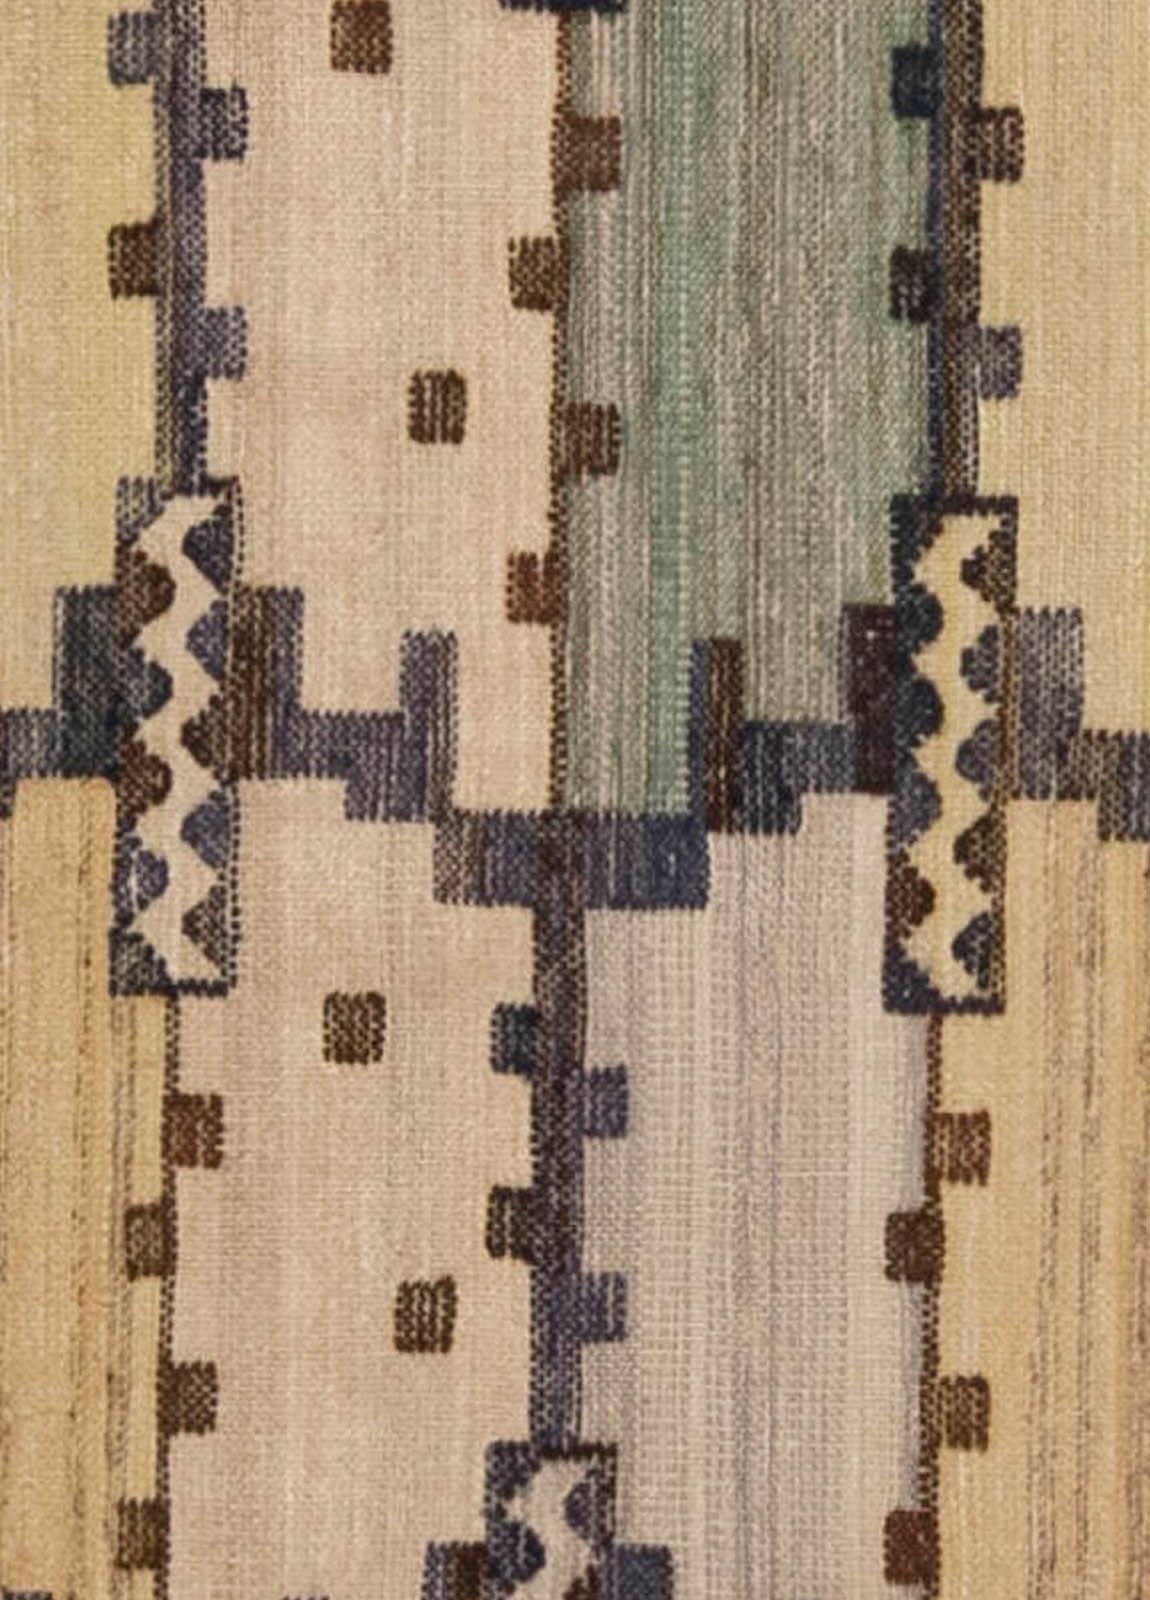 Mid-20th century geometric Swedish tapestry weave by Marta Mass Fjetterstrom
Size: 5'1